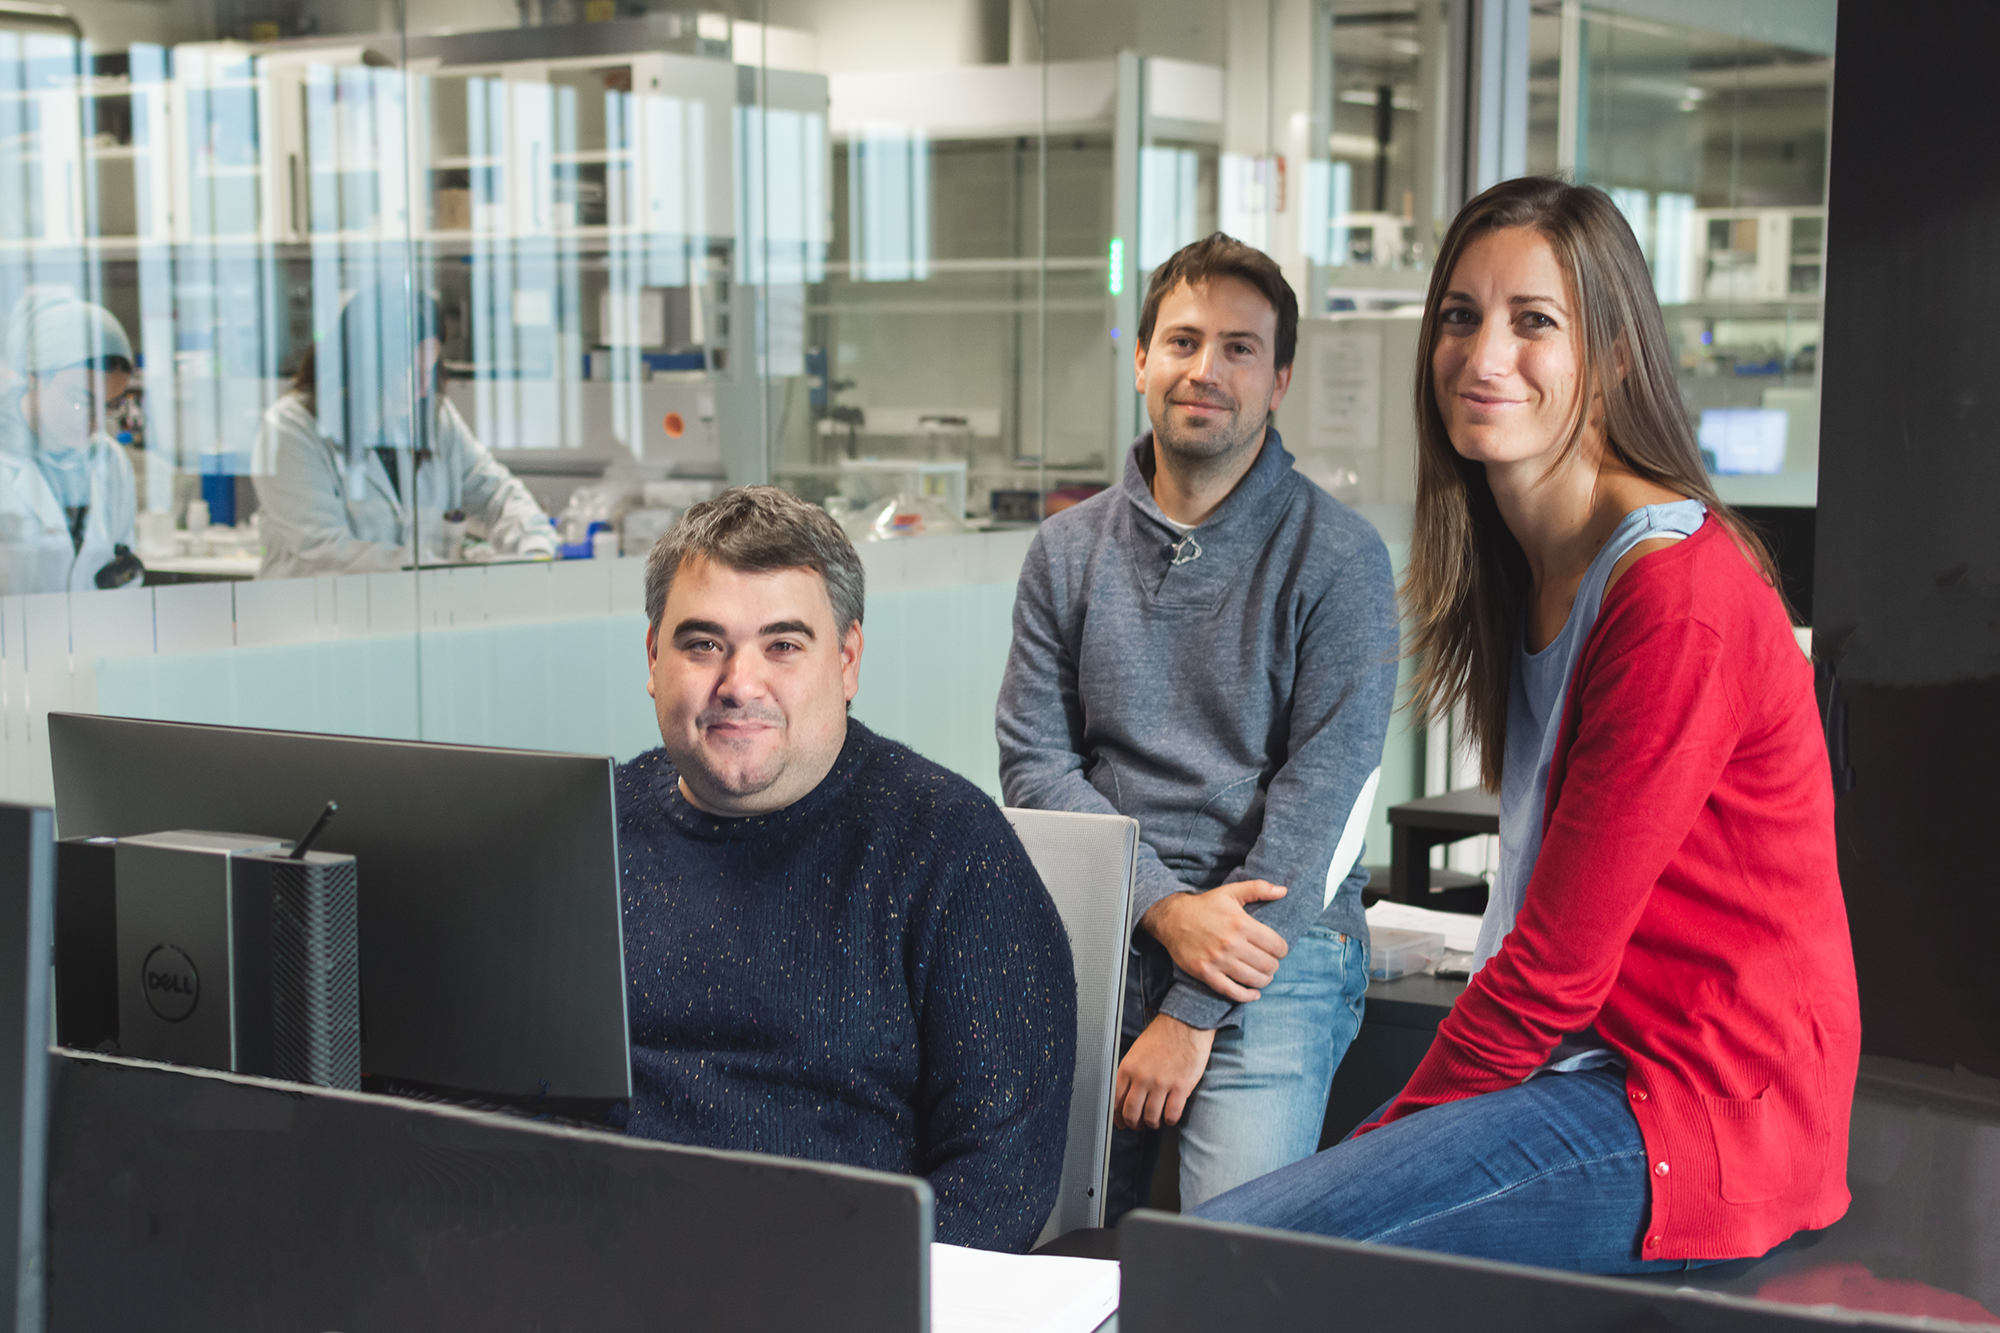 Three of CIC energiGUNE´s workers that take part in the PULSELiON project pose in a common working area in front of a laboratory, where it seems that there are researchers working.